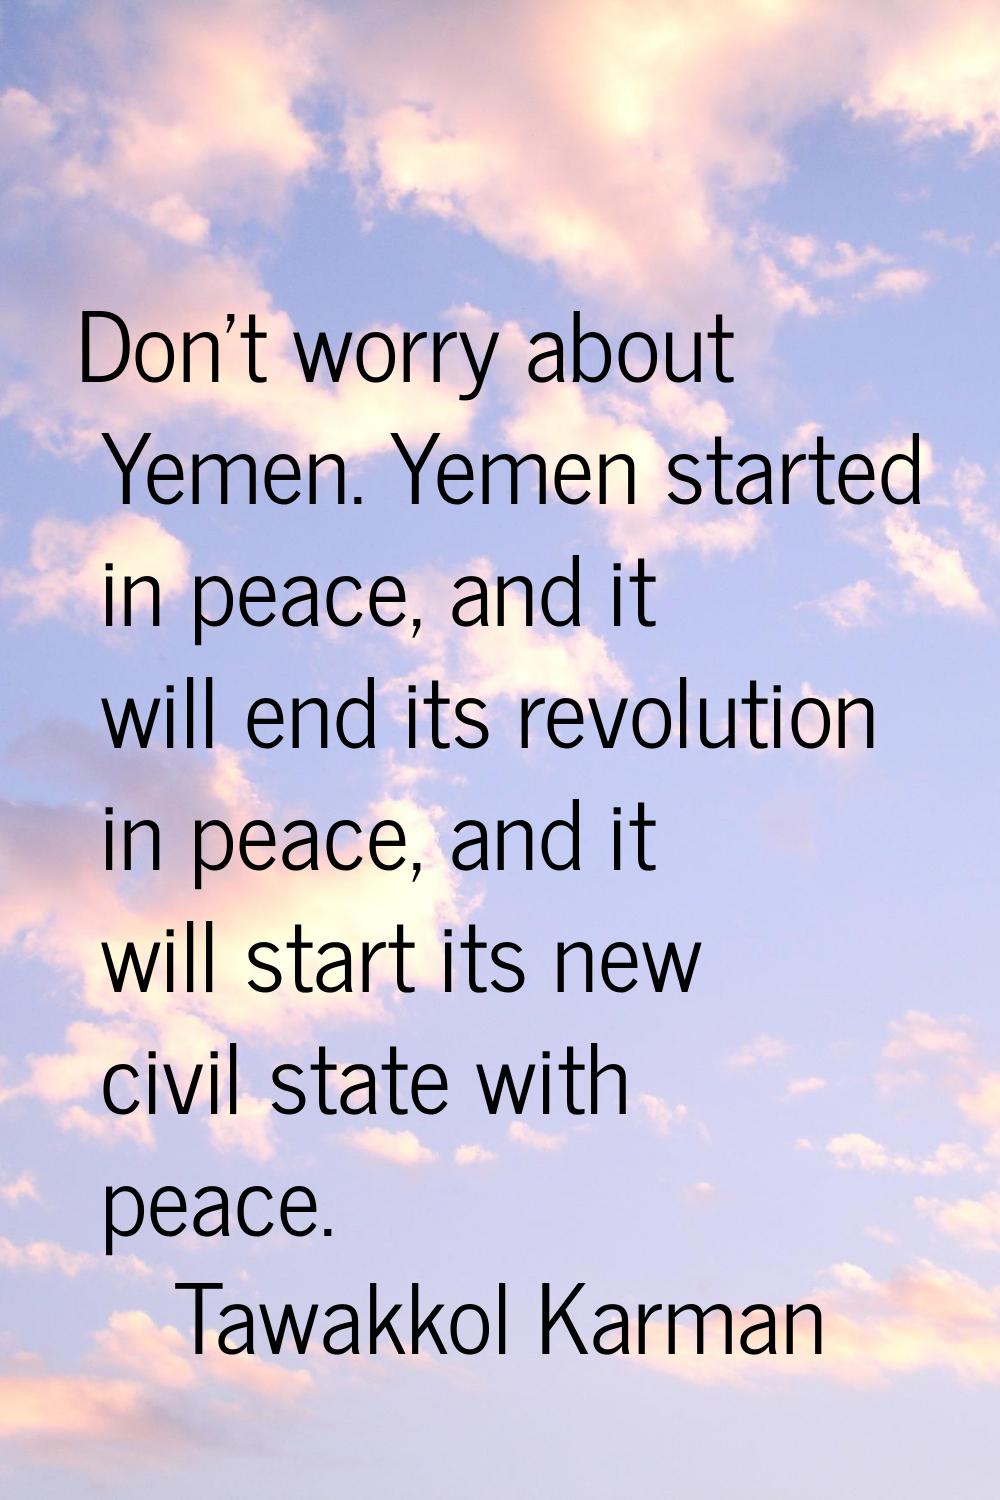 Don't worry about Yemen. Yemen started in peace, and it will end its revolution in peace, and it wi